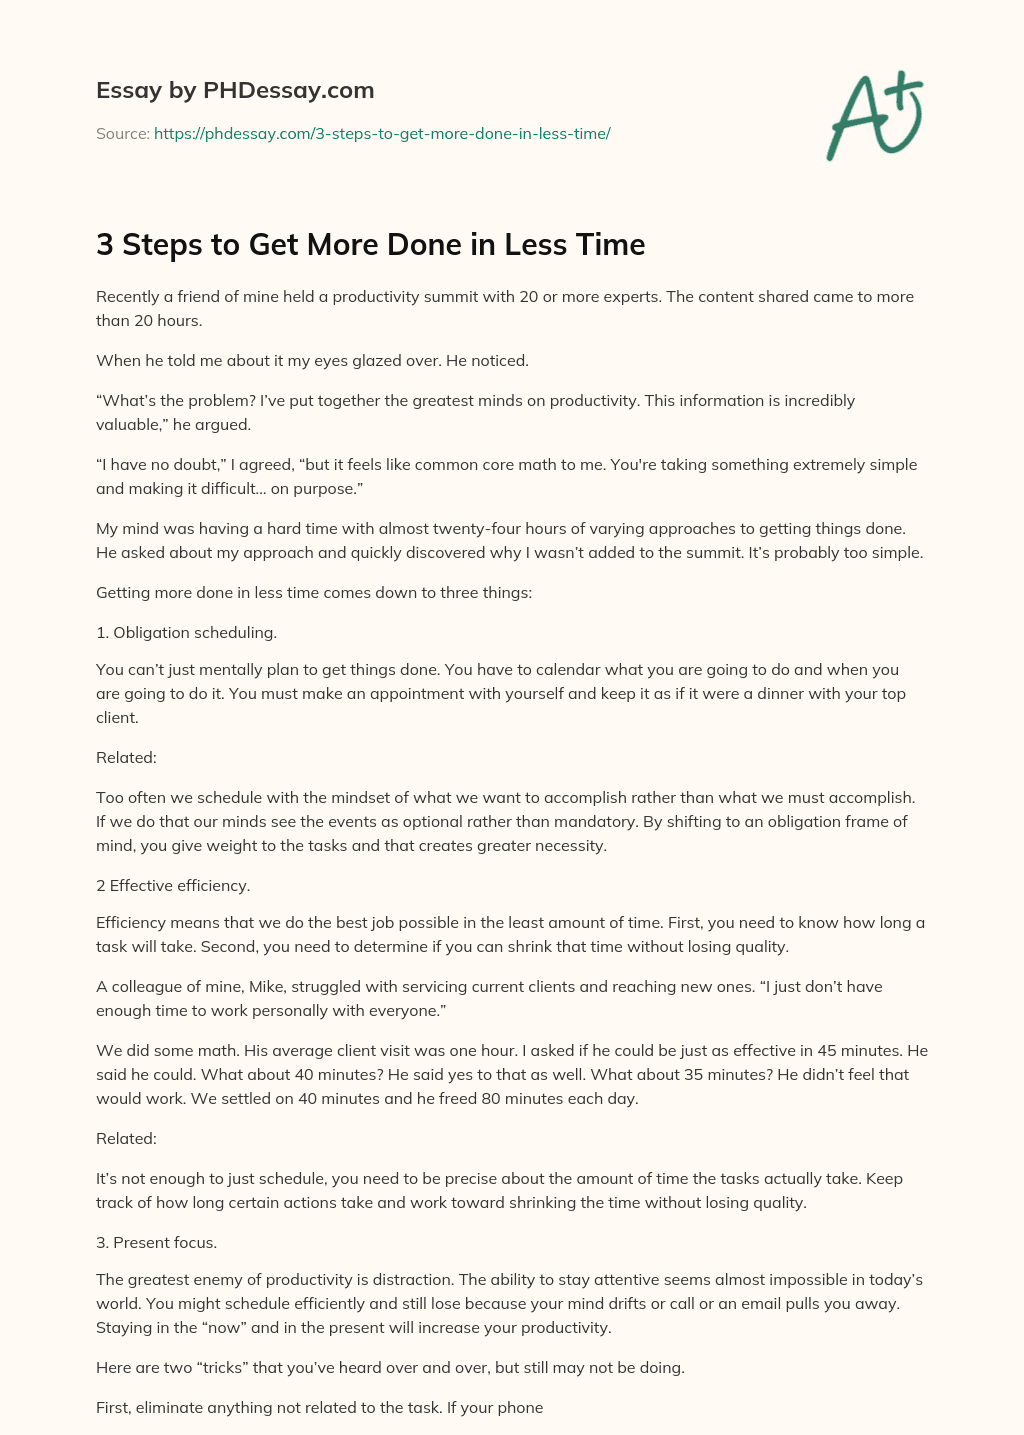 3 Steps to Get More Done in Less Time essay